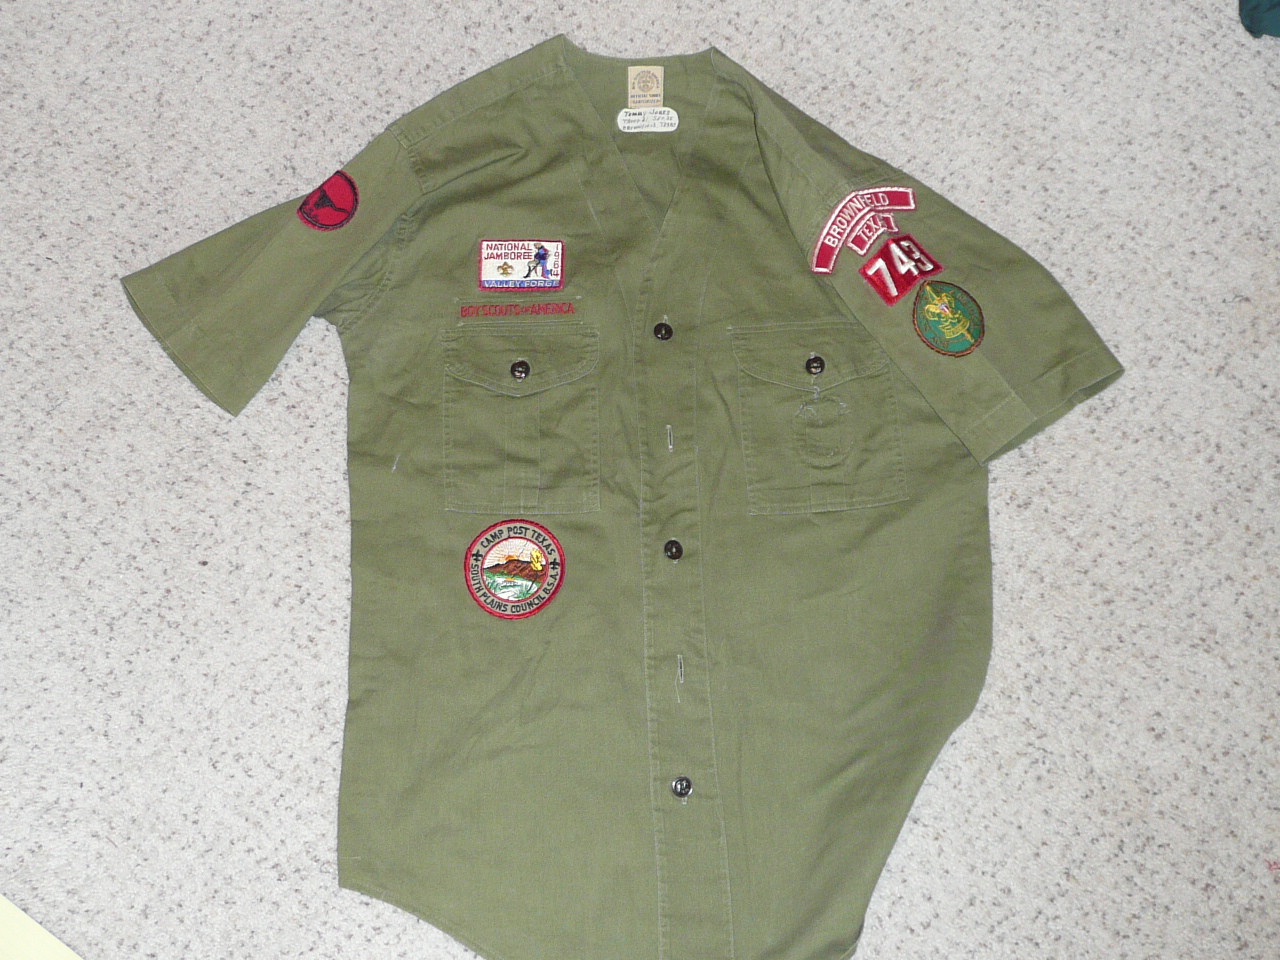 1960's Boy Scout Uniform Shirt 1964 Jamboree from Brownfeld TX, 20" Chest and 28.5" Length, #FB28